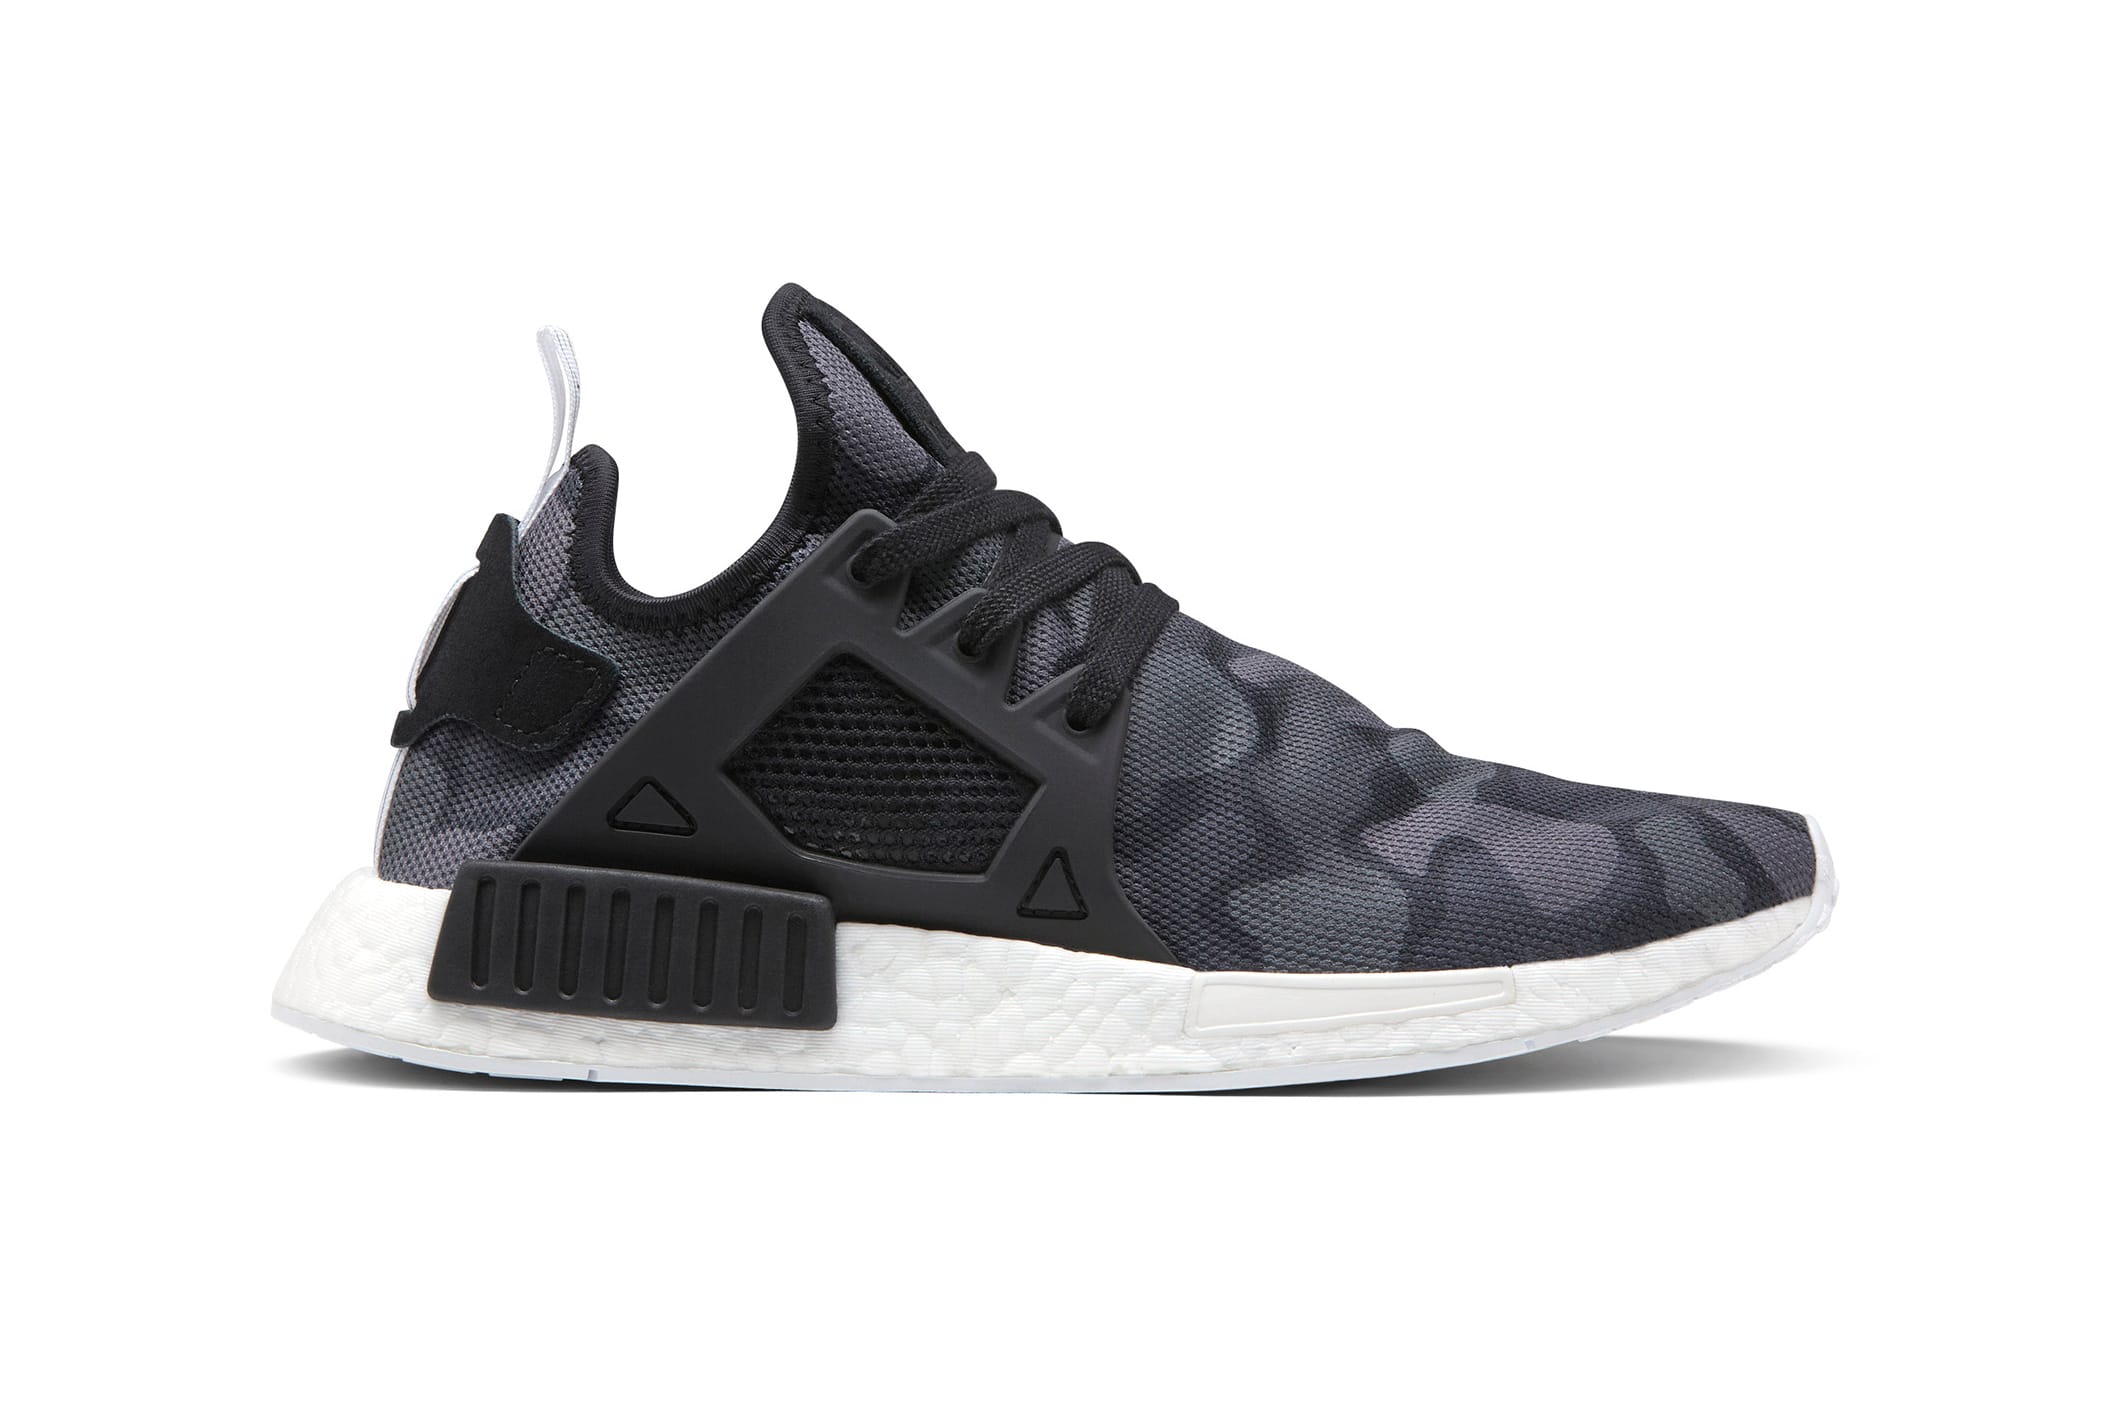 nmd xr1 outfit